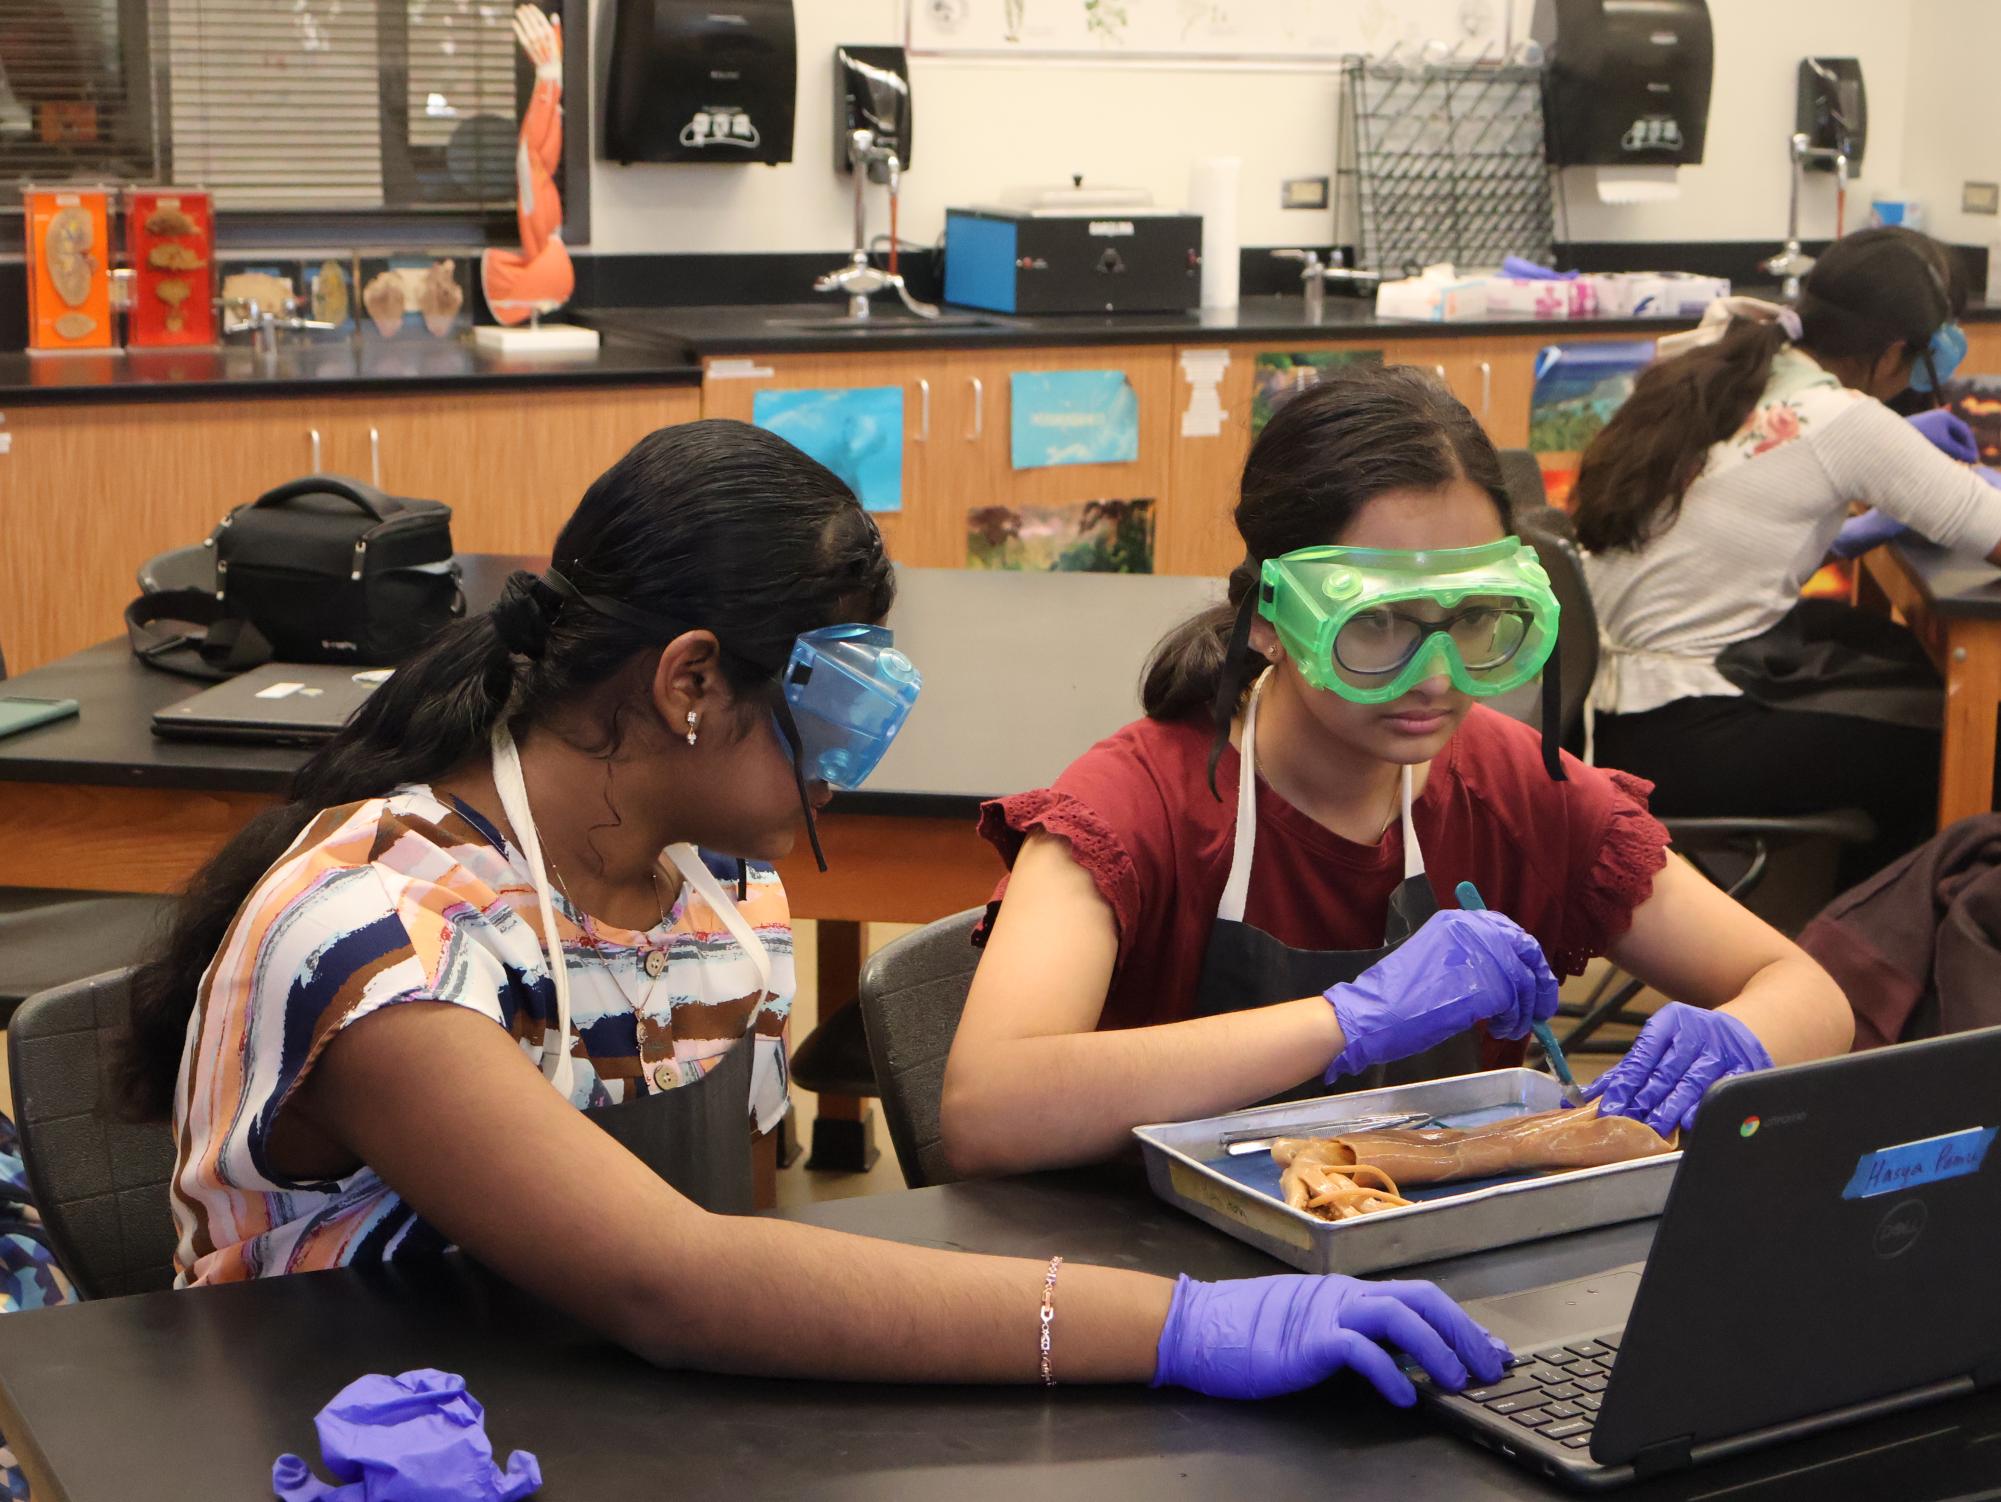 Anatomy+%26+Dissection+Club+Gets+Their+Hands+Inky+for+Squid+Dissection